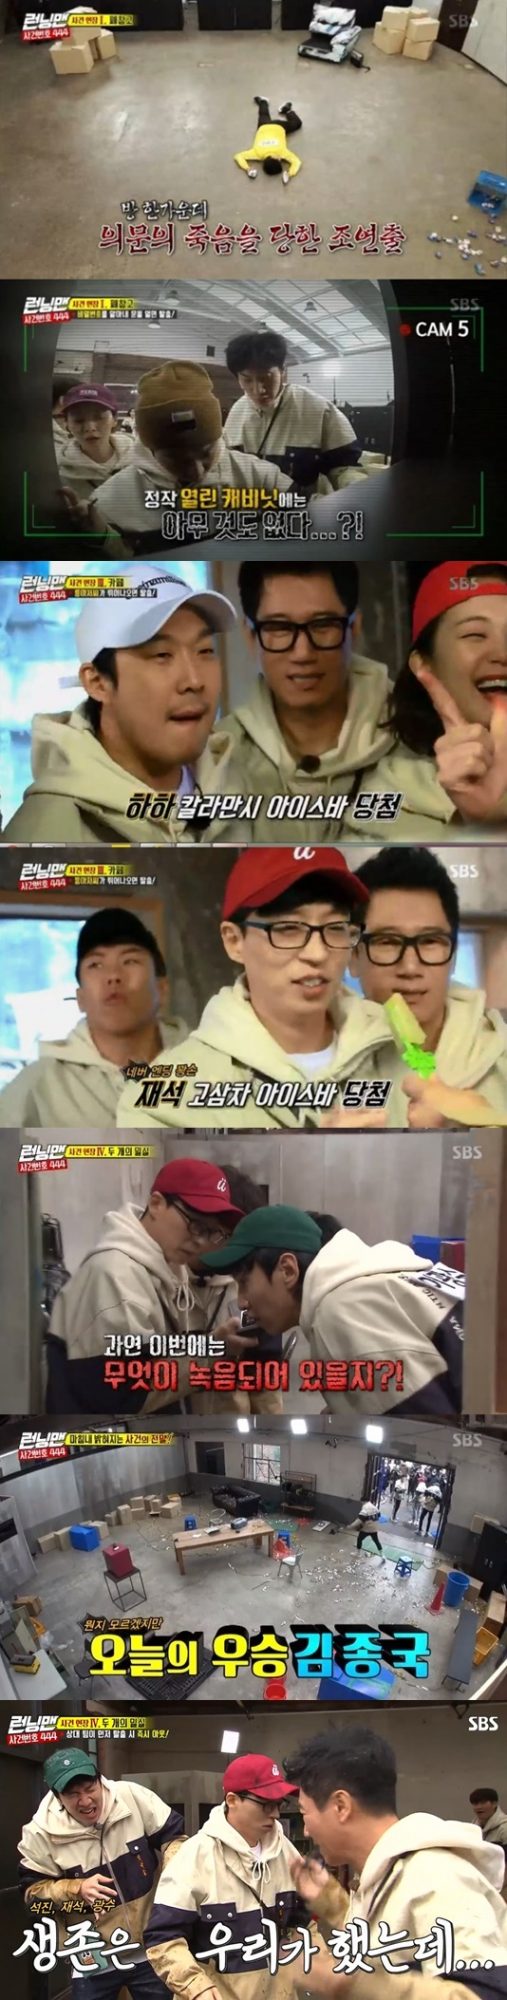 SBS Running Man remained at the top of the 2049 ratings.According to Nielsen Korea, a ratings agency, Running Man, which was broadcast on the 24th, ranked first in the same time zone with 4.0% of the 2049 target audience rating (based on the second part of the audience rating of households in the metropolitan area), which is an important indicator of major advertising officials.In addition, it won the Sunday entertainment 2049 TOP 3 following the Ugly Our Little and Death and Deacon. The average audience rating of the broadcast was 5.3% for the first part and 7.4% for the second part.The highest audience rating per minute rose to 8.4 percent.The broadcast was featured on the race Case Number 444, which is looking for the sign of the supporting actor A who was questioned.The members gathered in the waste warehouse had to find the killer who had left the supporting role A before the sun set.As a result of collecting evidence one by one in the waste warehouse, I learned that there was a password in Song Ji-hyo shoes.Song Ji-hyo was suspected of being the culprit, but later members performed the mission in turn and got new hints.The members divided into Ji Suk-jin team and Song Ji-hyo team and played a team confrontation to find out the criminal first.Yoo Jae-Suk, who combines many mission hints, shouted that the identity of the criminal was fine dust.So, three people, except for the person who pulled the lever on the last mission, were ordered to escape the room.Kim Jong-kook pulled the lever in urgency, and Yoo Jae-Suk, Lee Kwang-soo and Ji Suk-jin escaped the room.But the result was Kim Jong-kooks victory, which remained in the room; the three who betrayed the team members were hit by a water bomb.The scene recorded the highest audience rating of 8.4% per minute, accounting for the best one minute.